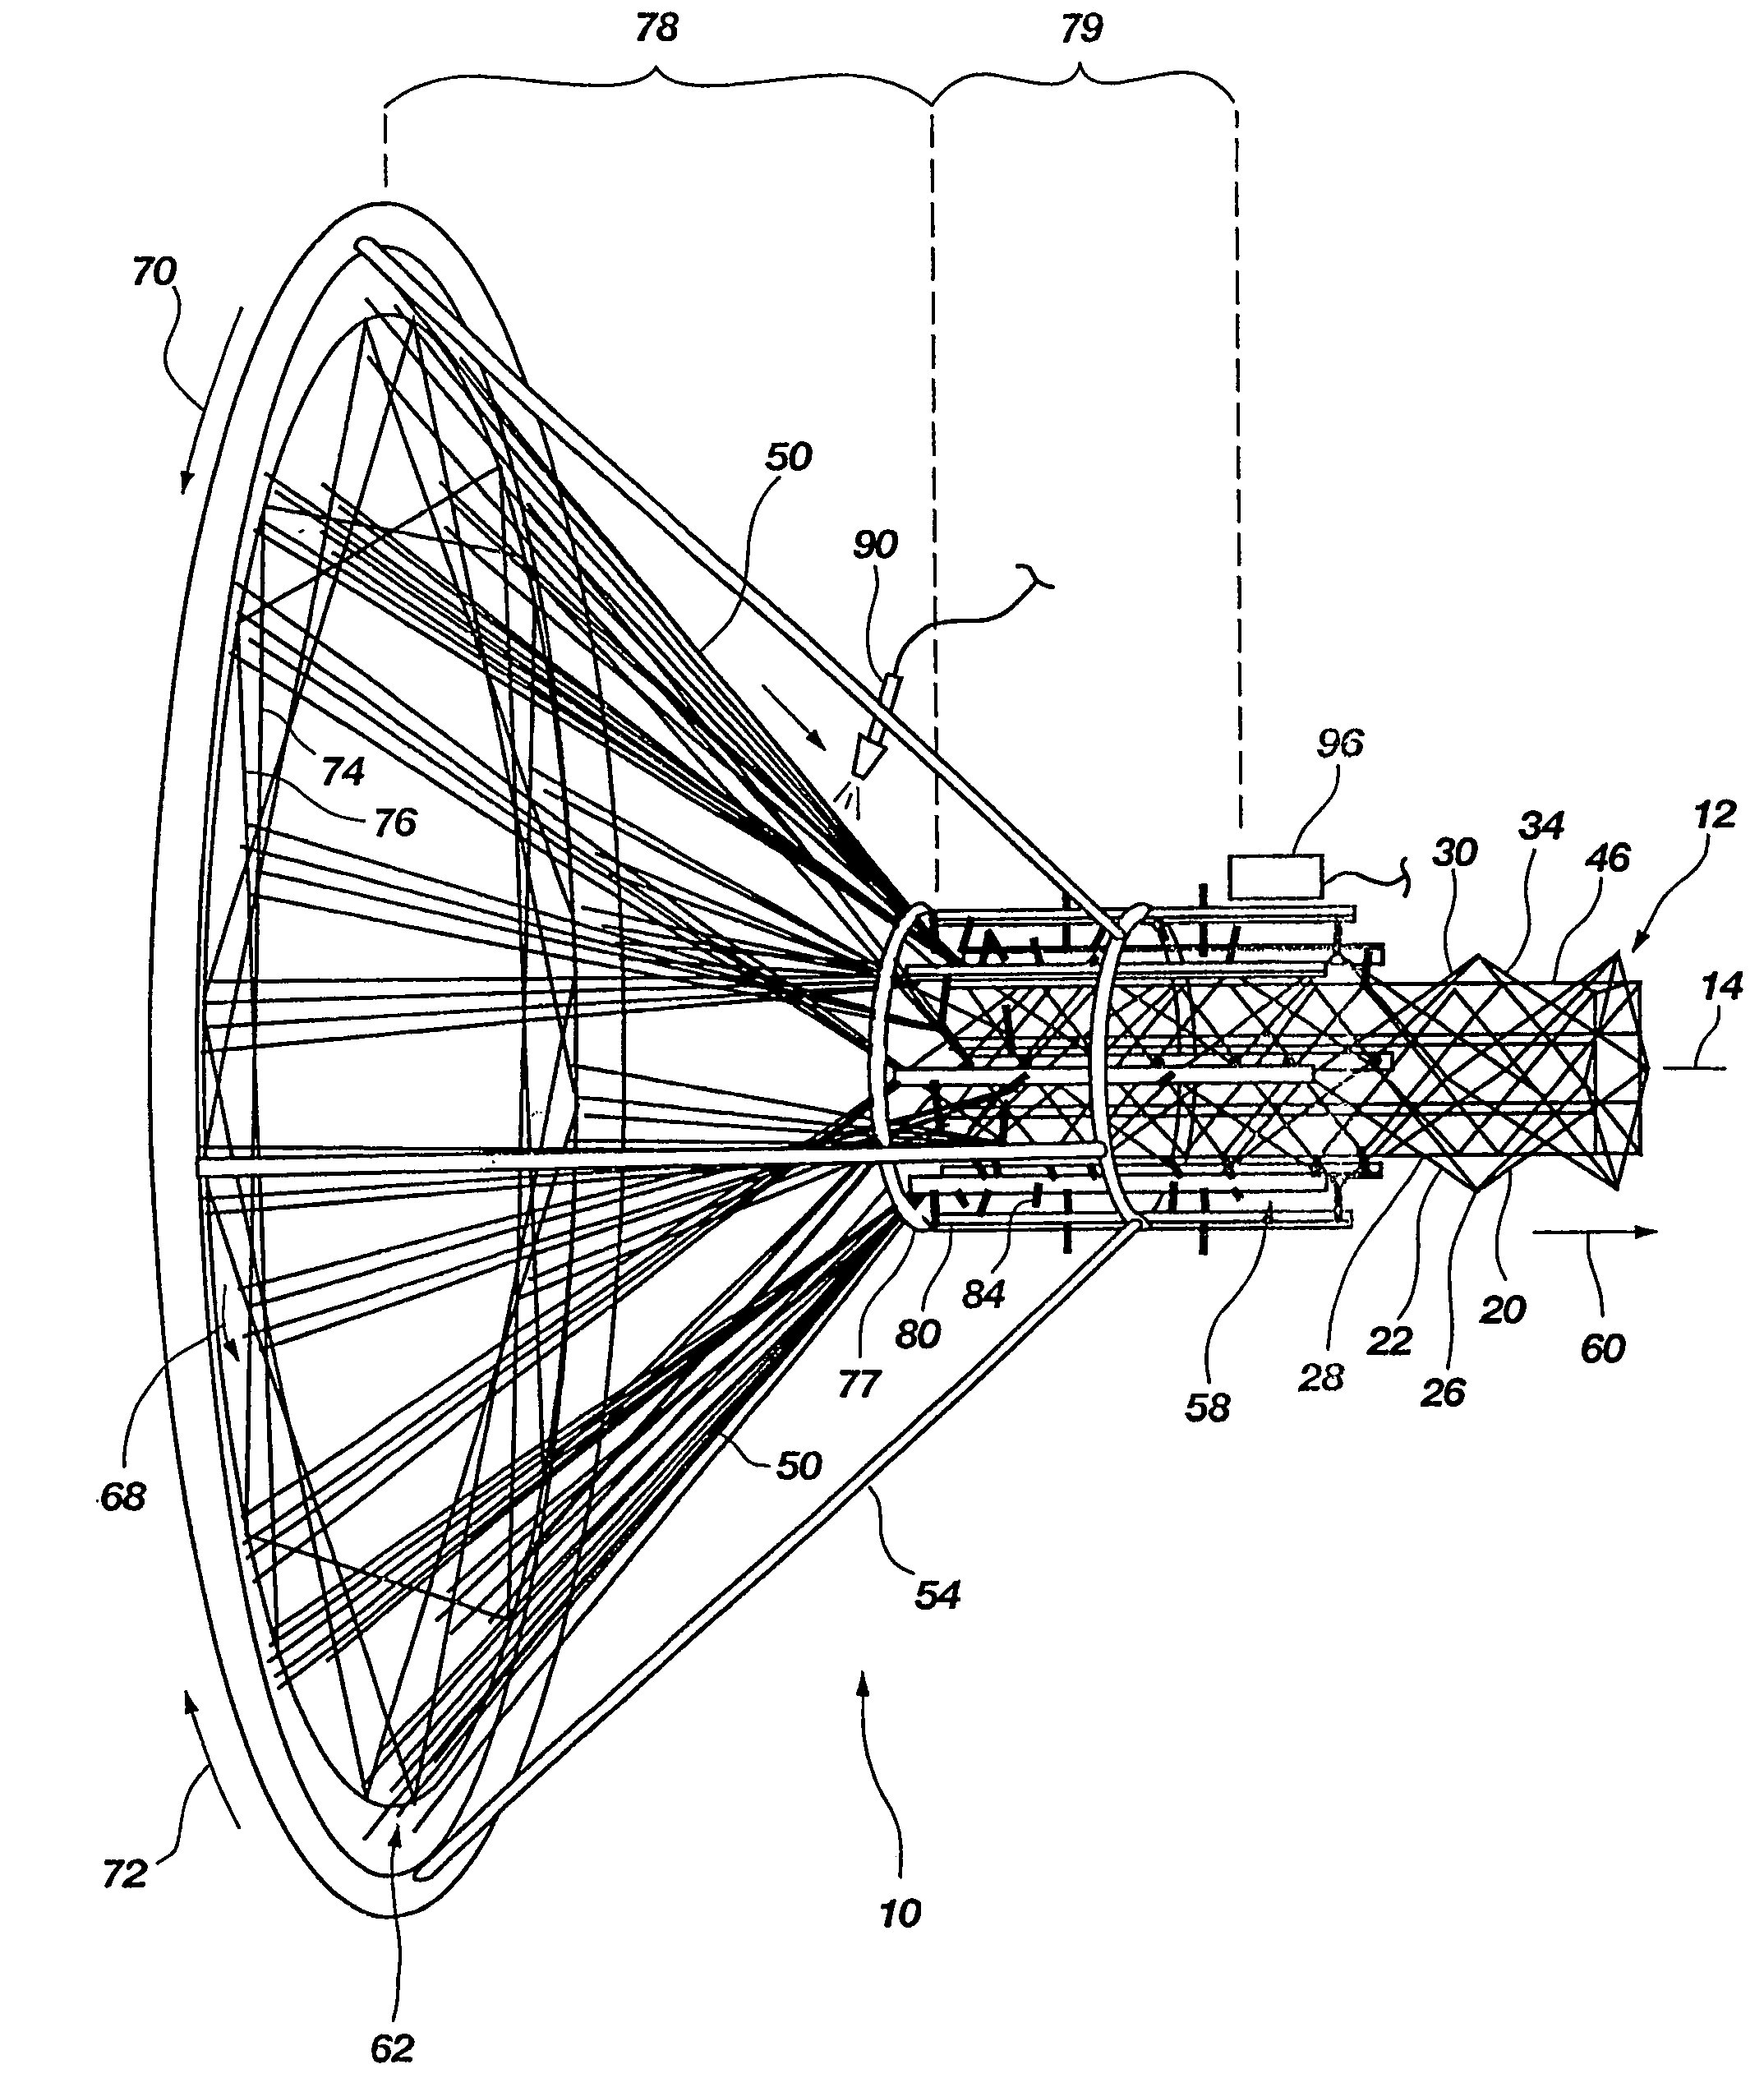 Complex composite structures and method and apparatus for fabricating same from continuous fibers